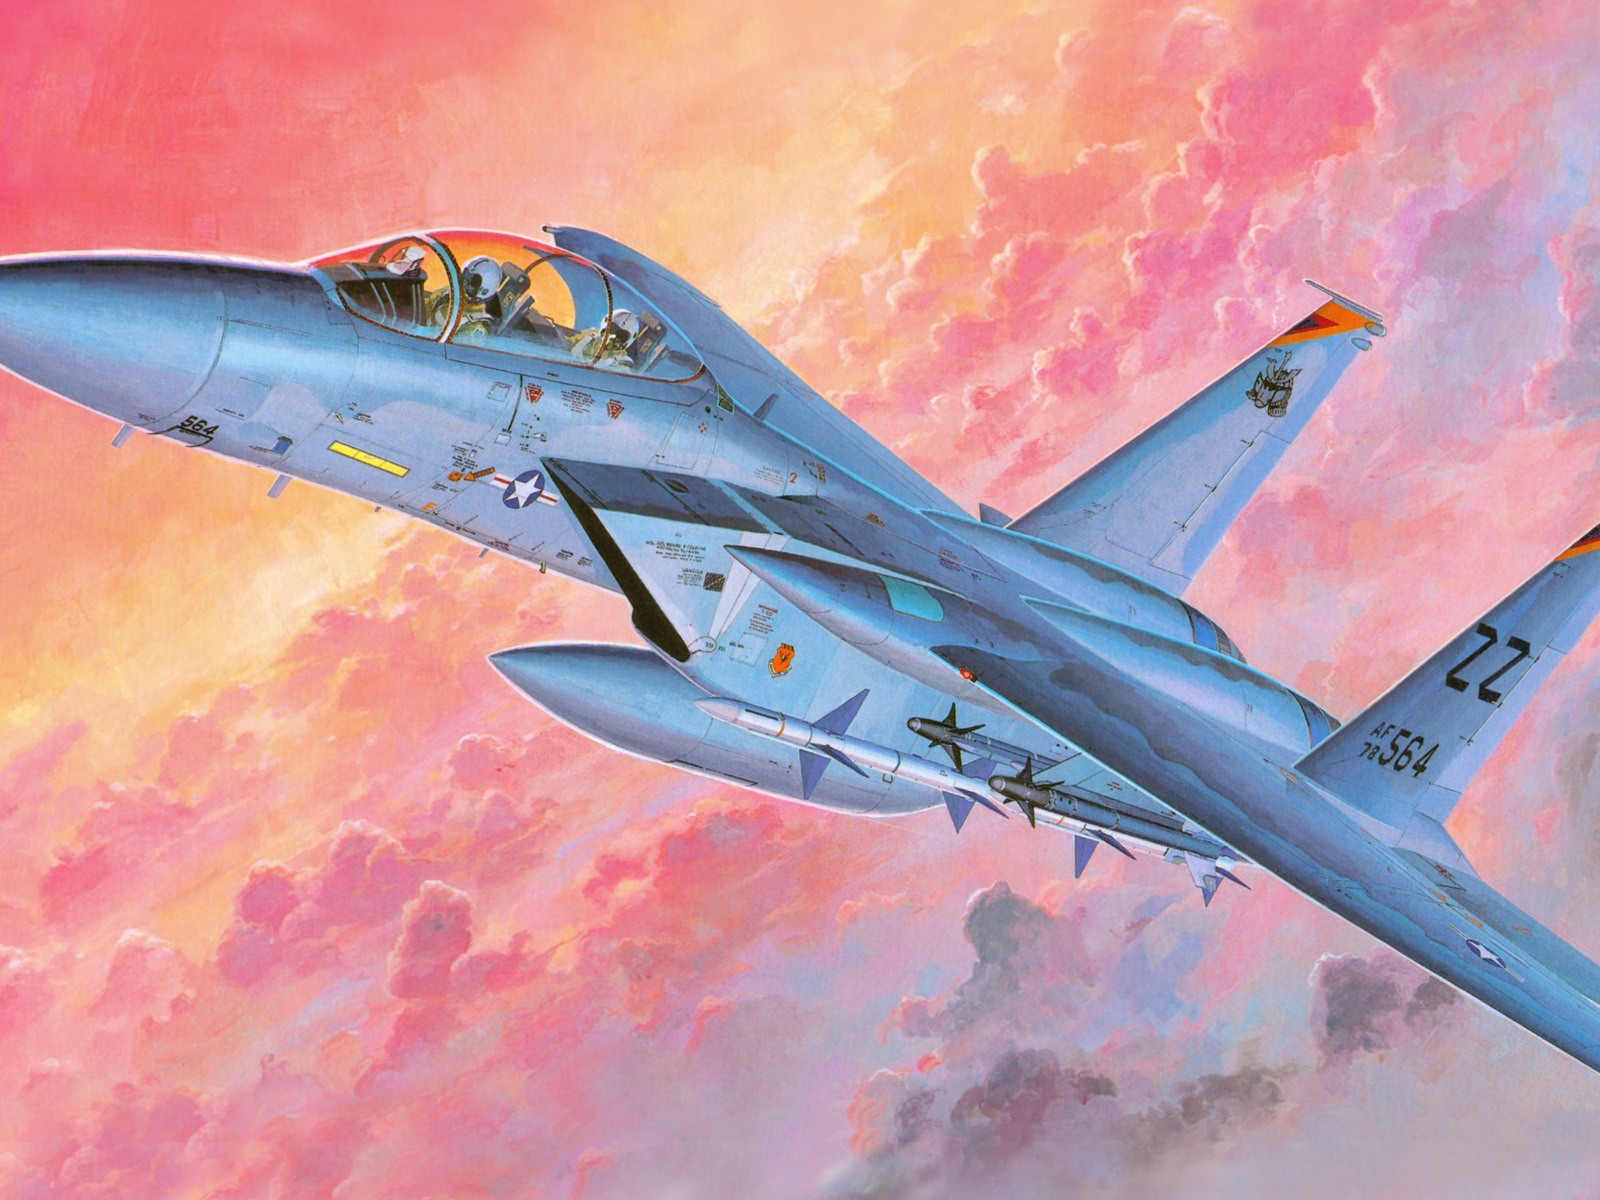 Military aircraft flight exquisite painting wallpapers #15 - 1600x1200